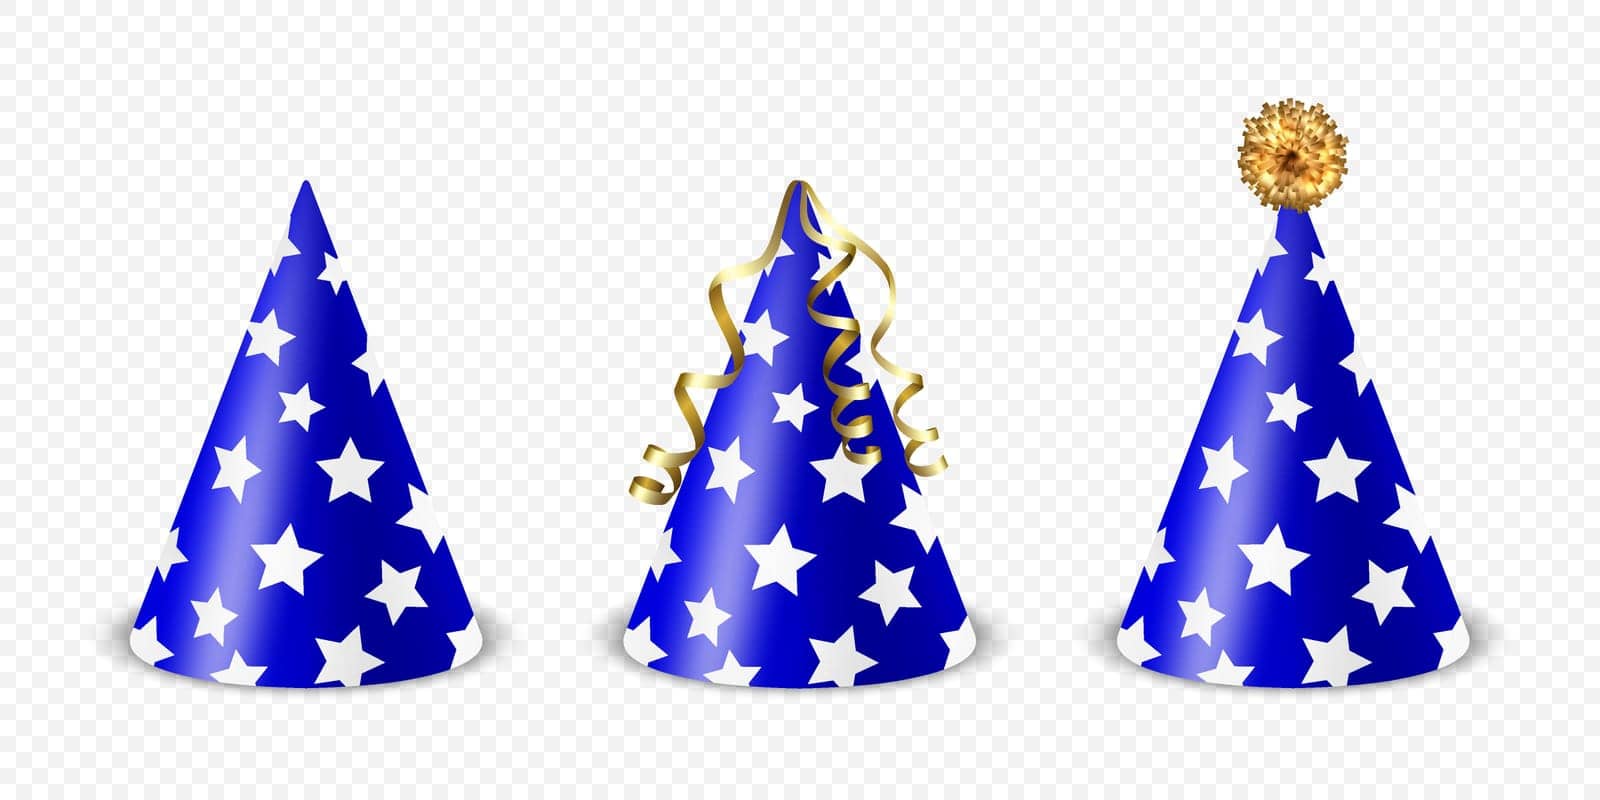 Vector 3d Realistic Blue and White Birthday Party Hat Icon Set Isolated on White Background. Party Cap Design Template for Party Banner, Greeting Card. Holiday Hats, Cone Shape, Front View.